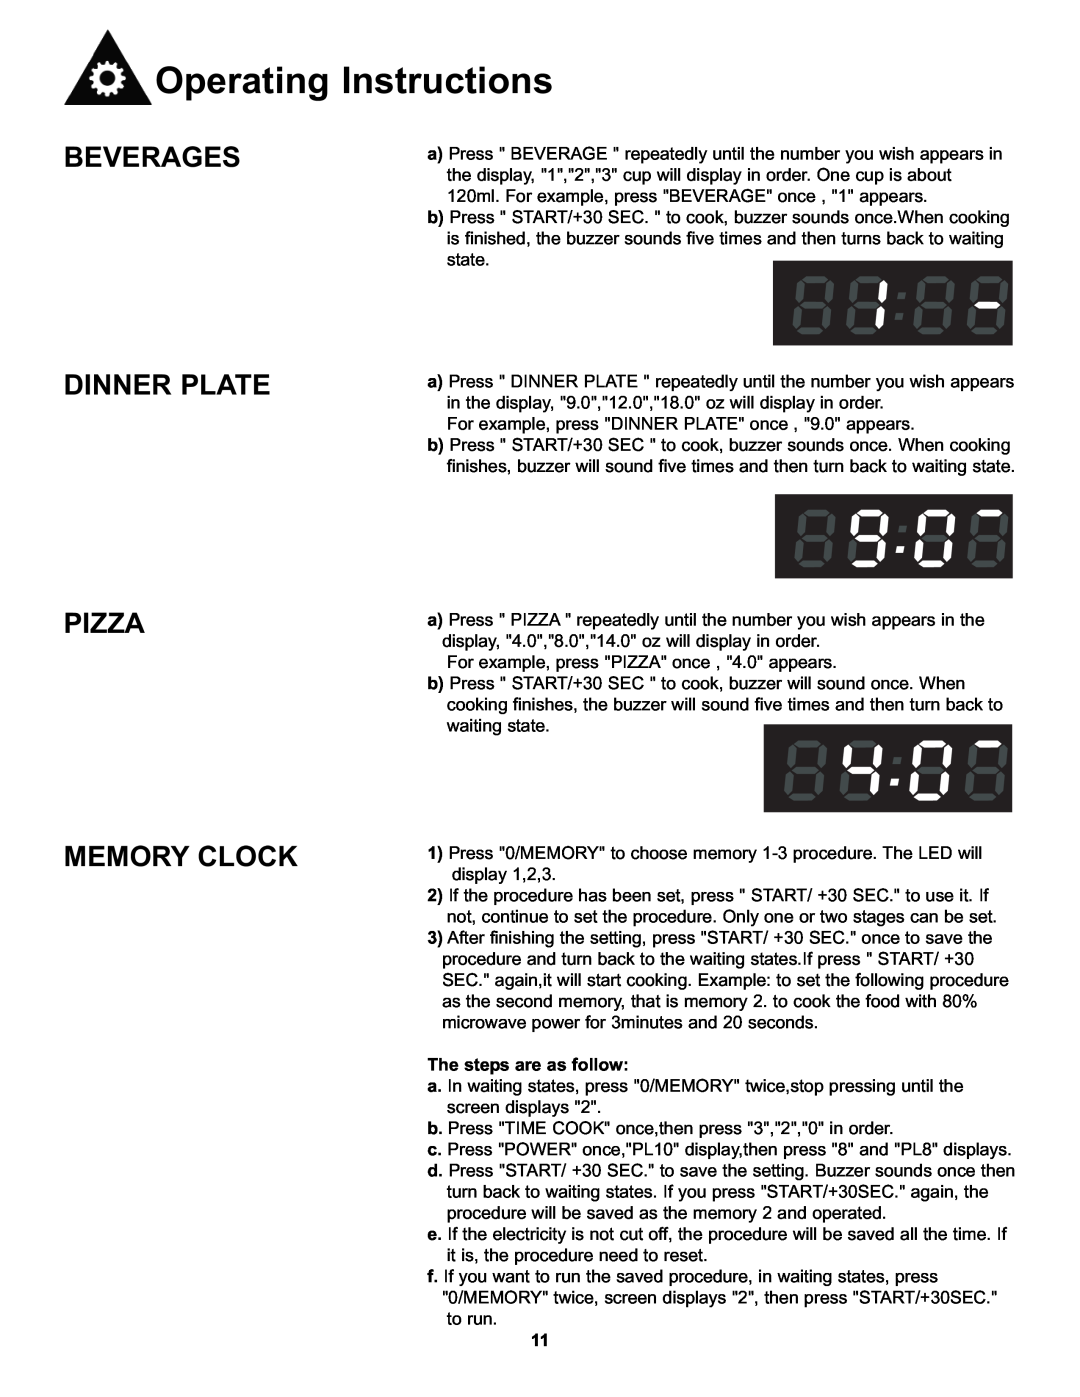 Danby DMW111KWDB manual Beverages Dinner Plate Pizza Memory Clock, Operating Instructions, The steps are as follow 